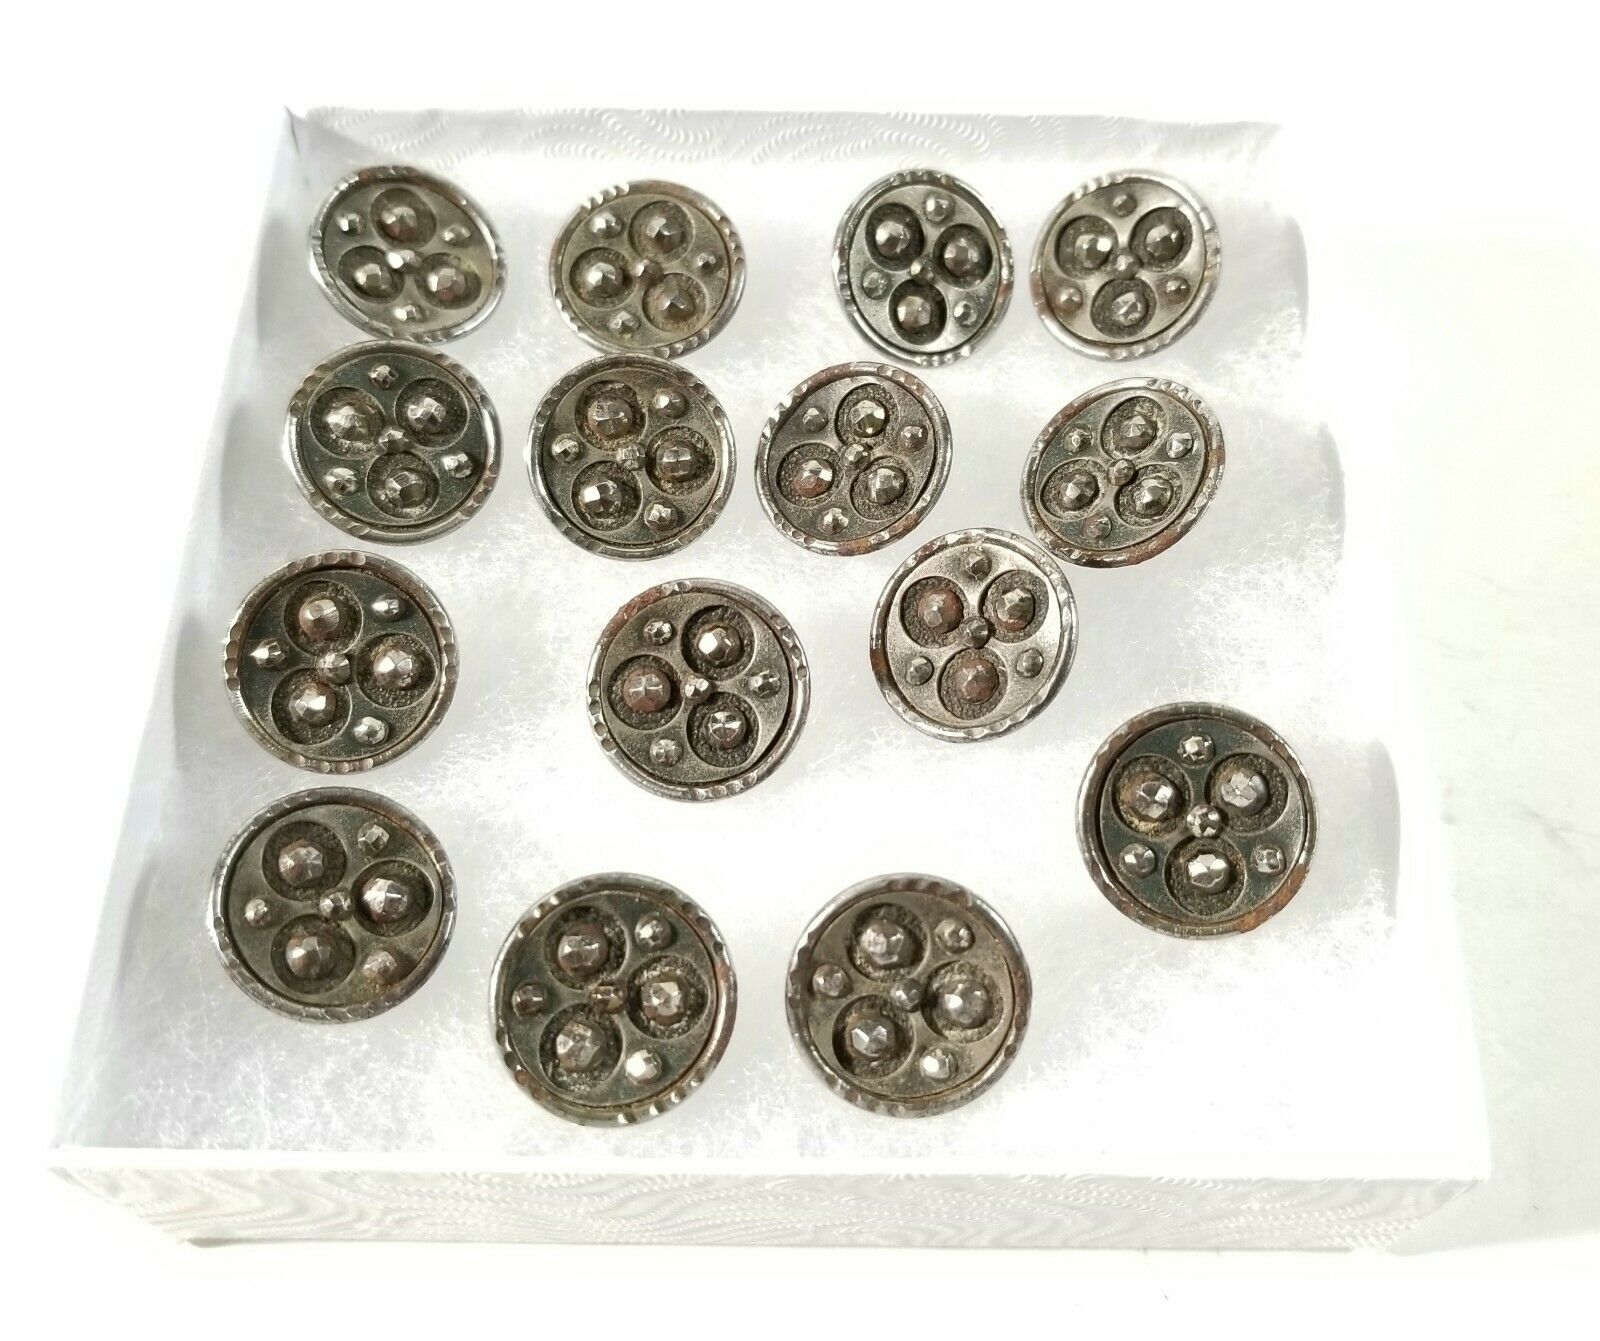 Lot Of 15 Antique Victorian Marcasite 5/8" Buttons Unmarked Metal Shank VFINE Без бренда